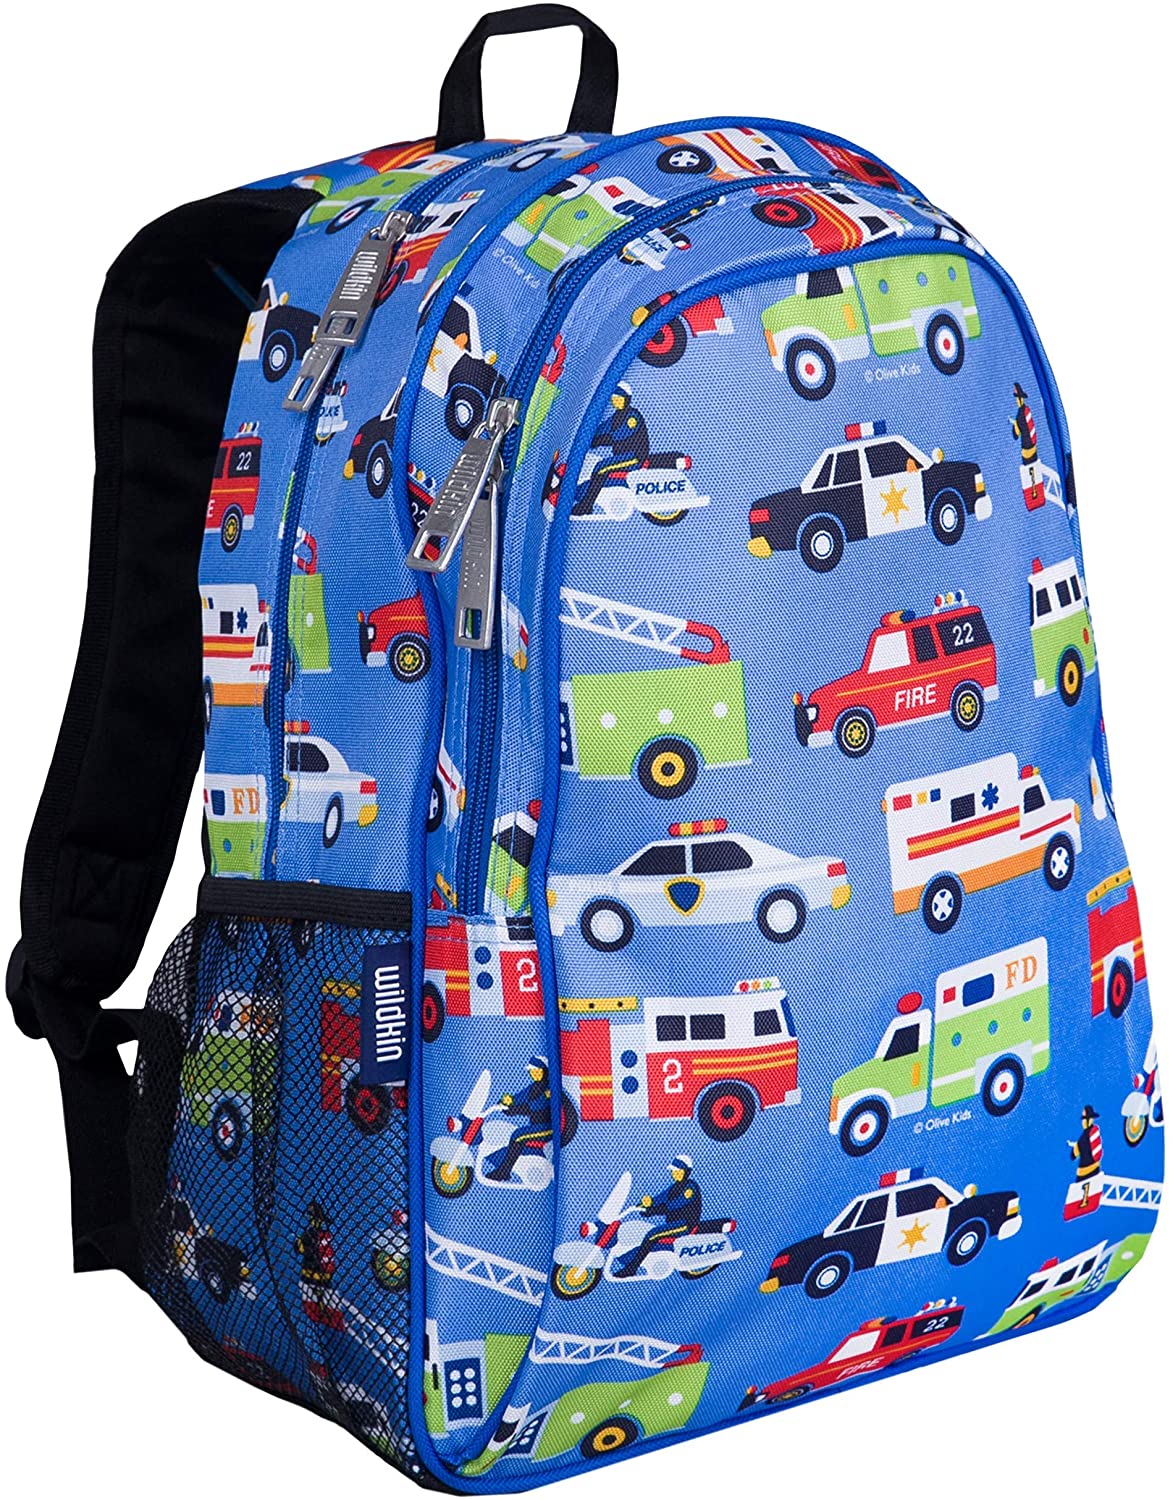 Wildkin Heroes Youth Backpack For Boys